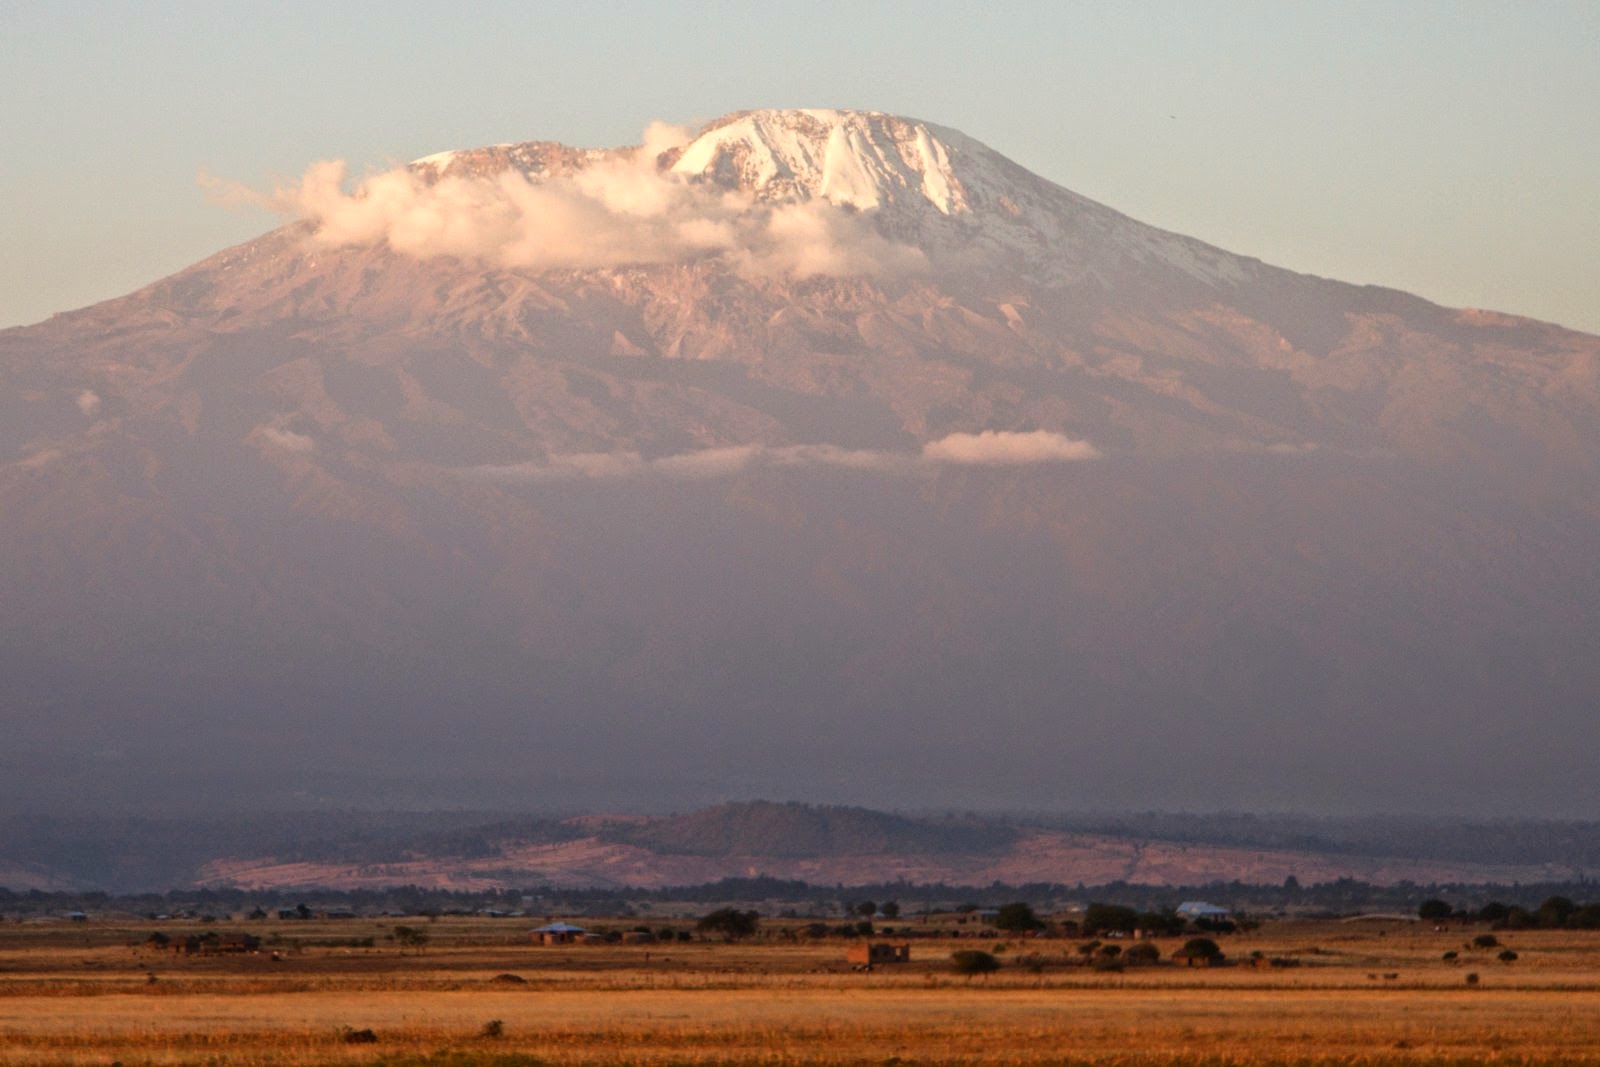 Sunset on Kilimanjaro. At 19,341 feet high and with more than 10,000 feet of local relief, the slopes of Kilimanjaro make a powerful demonstration of the effects of altitude on temperature. The lower plains have tropical warmth while the summit is covered in snow and ice year-round. 2012 photo by Tim Scharks.